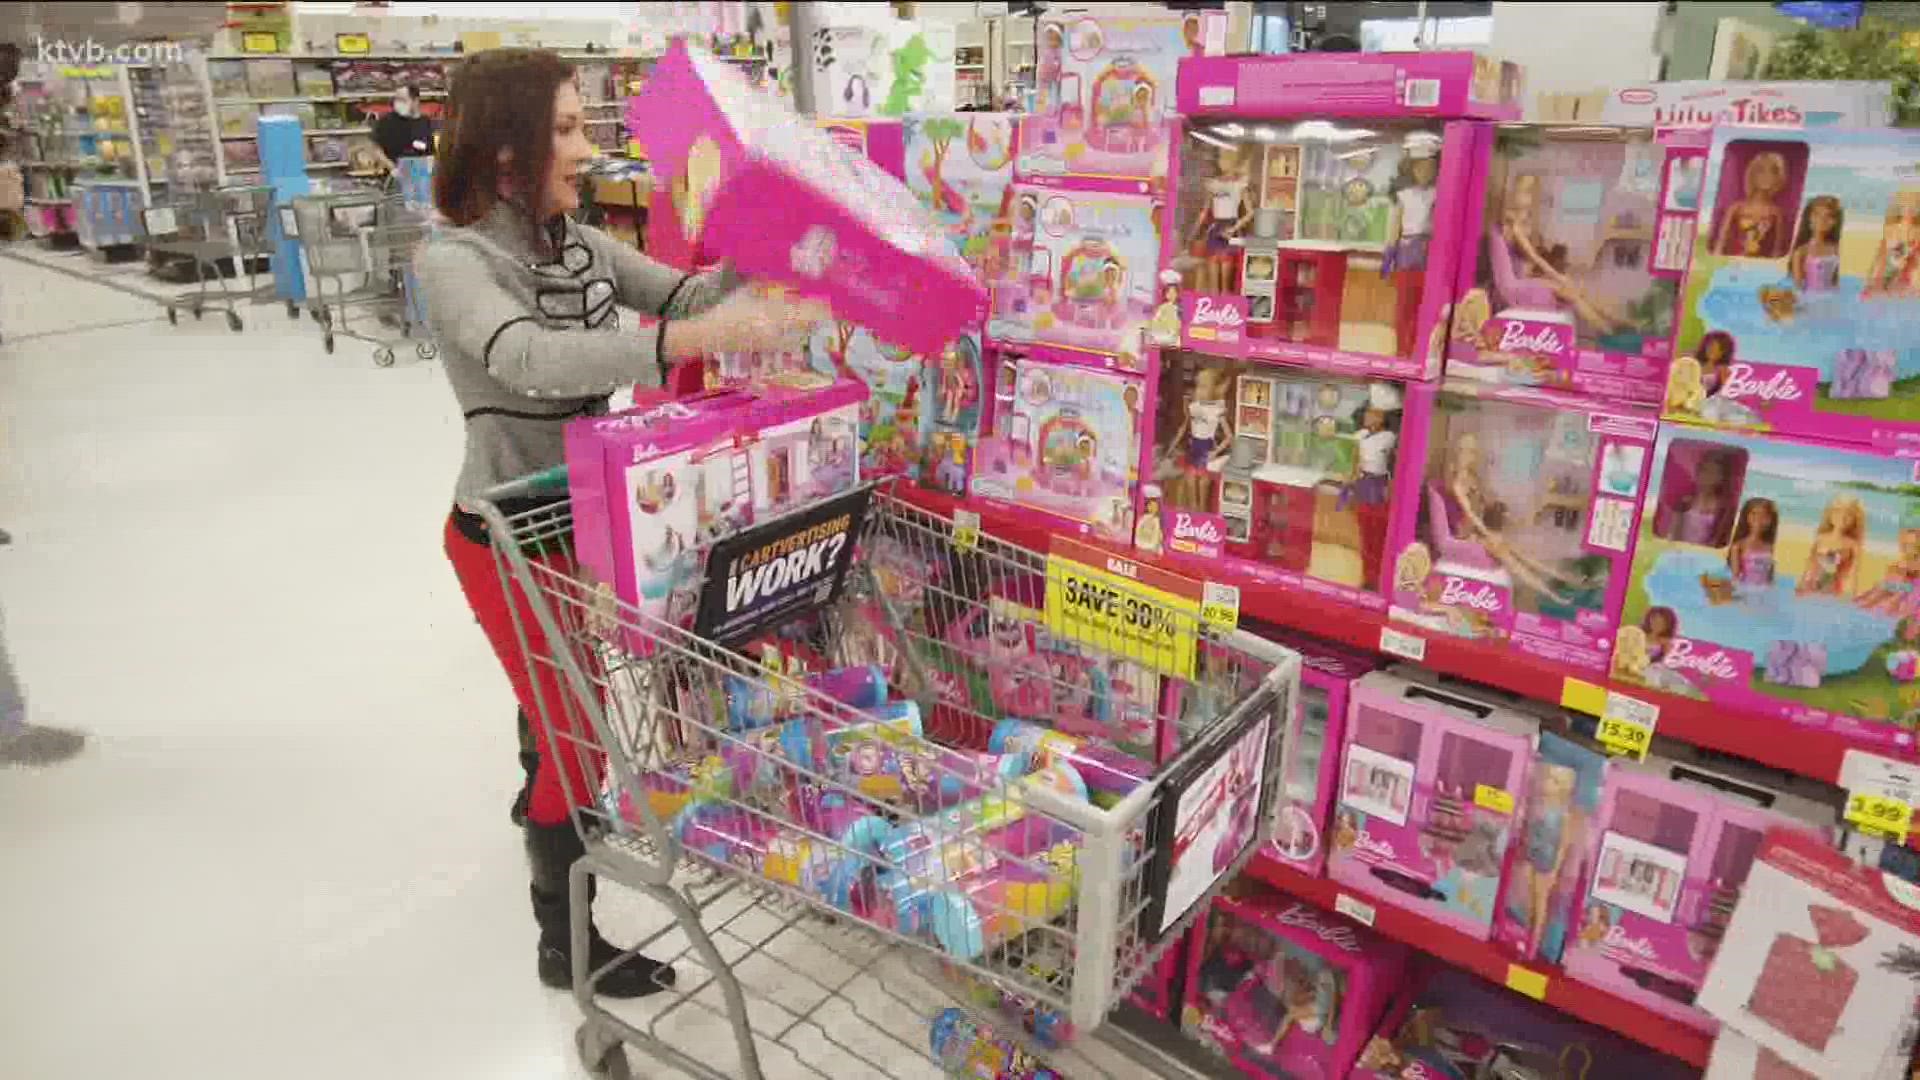 All proceeds from the shopping spree at the Twin Falls Fred Meyer go to the Salvation Army to give to kids around the Magic Valley this holiday season.